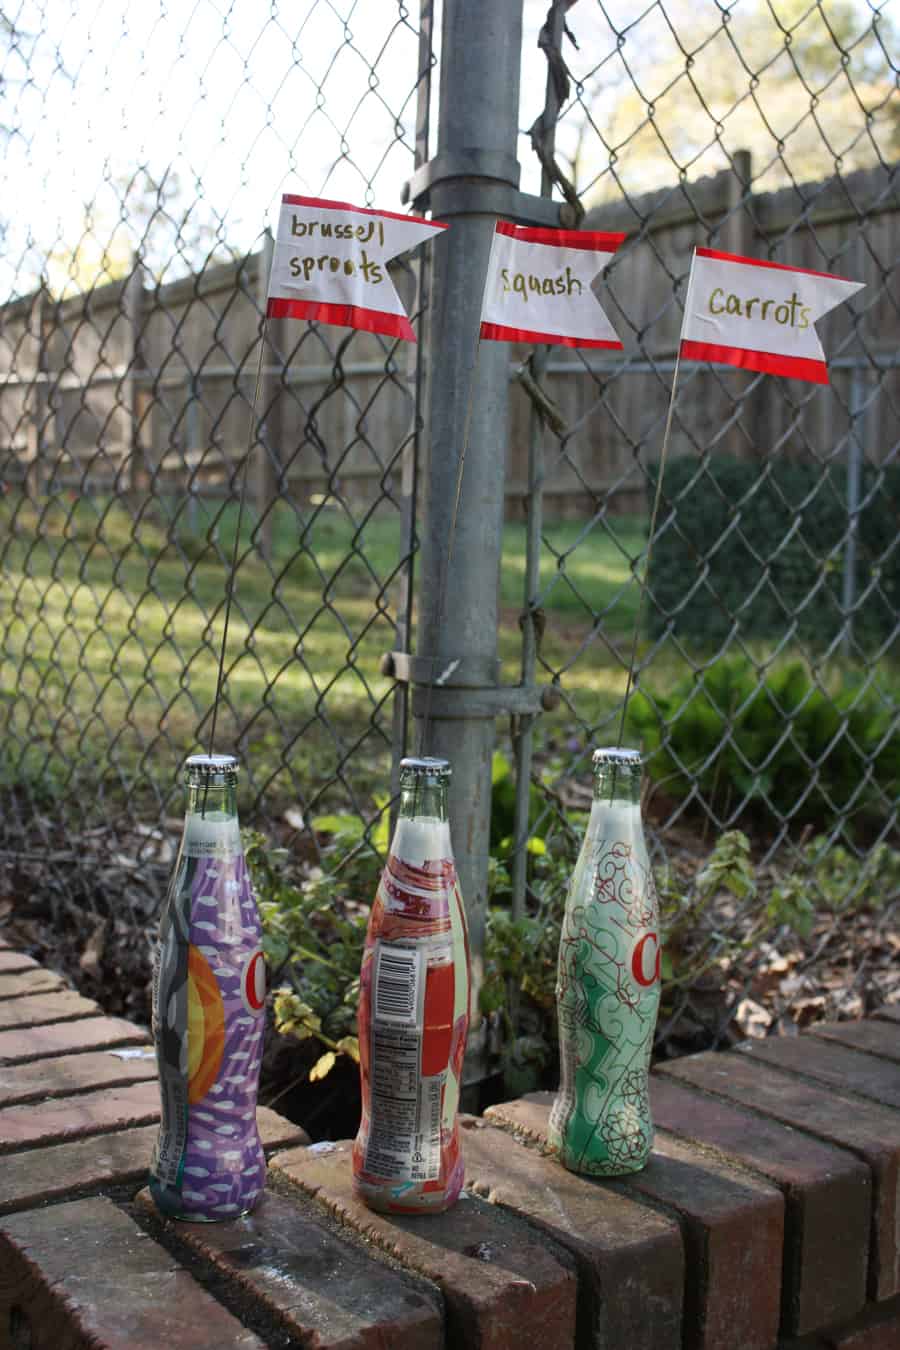 DIY garden plant markers: an easy way to recycle glass bottles and add more color to your yard! | via Autumn All Along